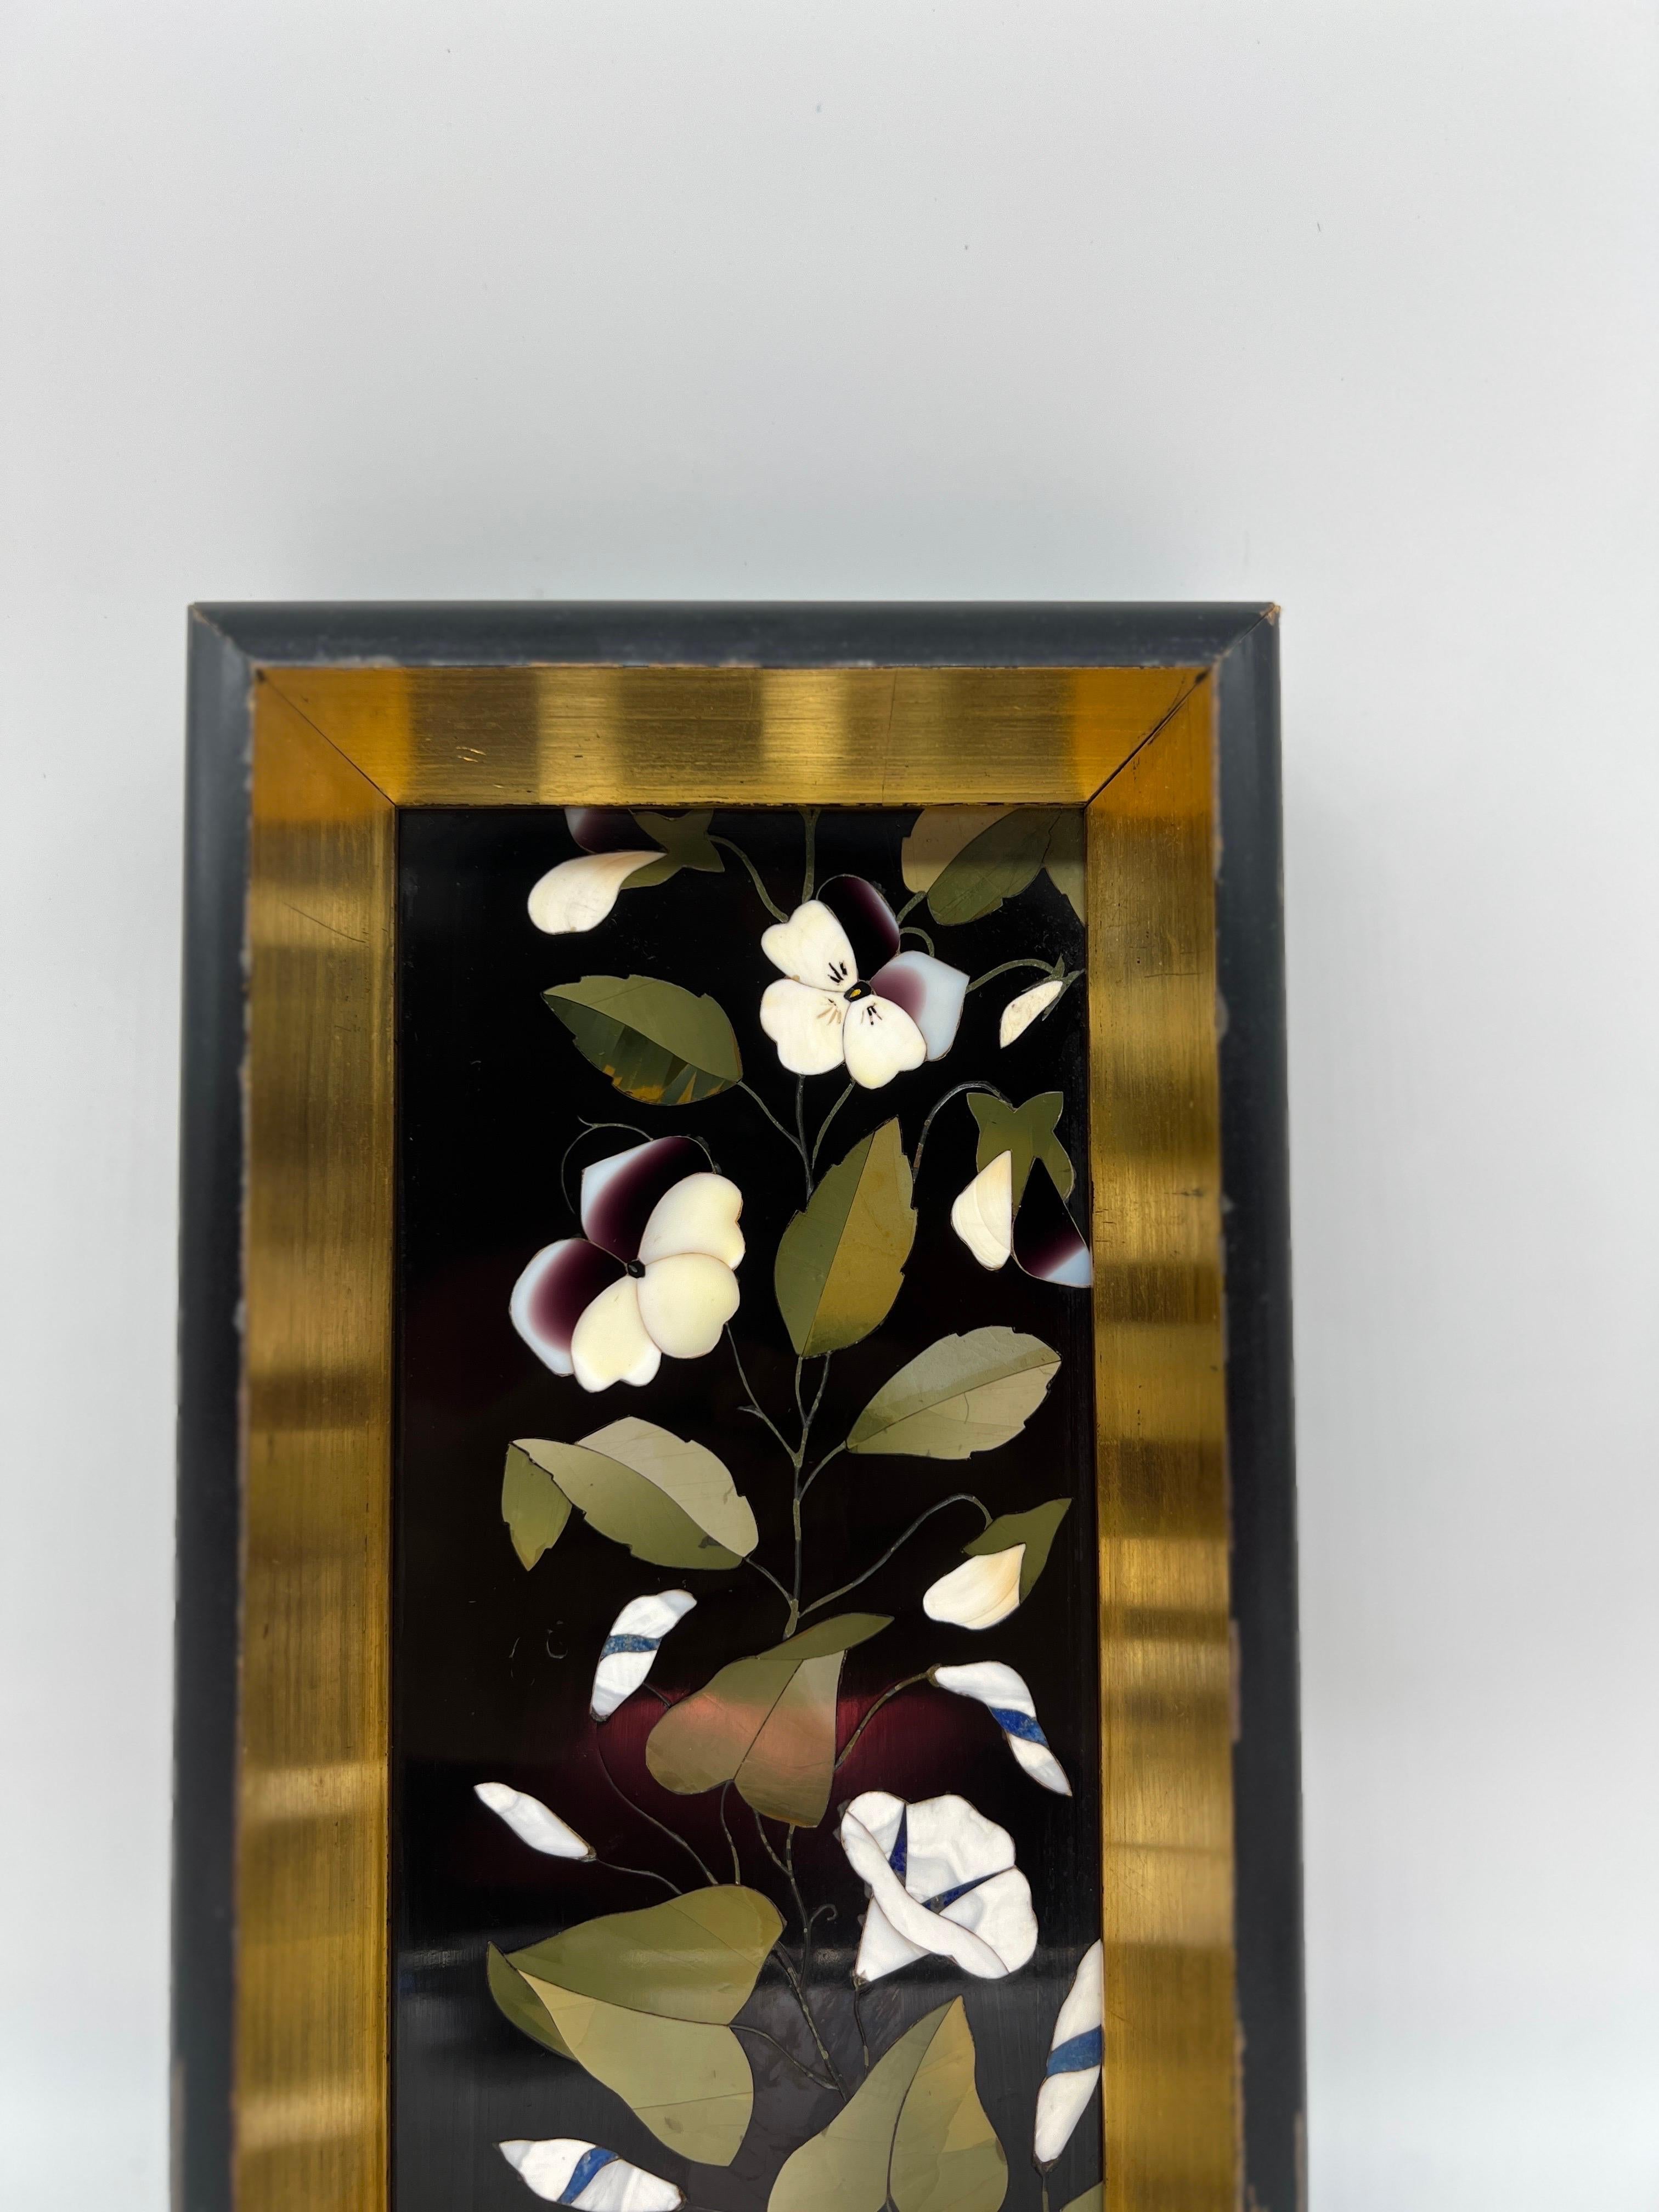 Italian, 19th century.

A fine quality Italian marble Pietra Dura plaque showcasing beautiful white calla lily flowers and vines. The piece is likely a fragment taken from a much larger piece. Set inside a quality giltwood frame. 